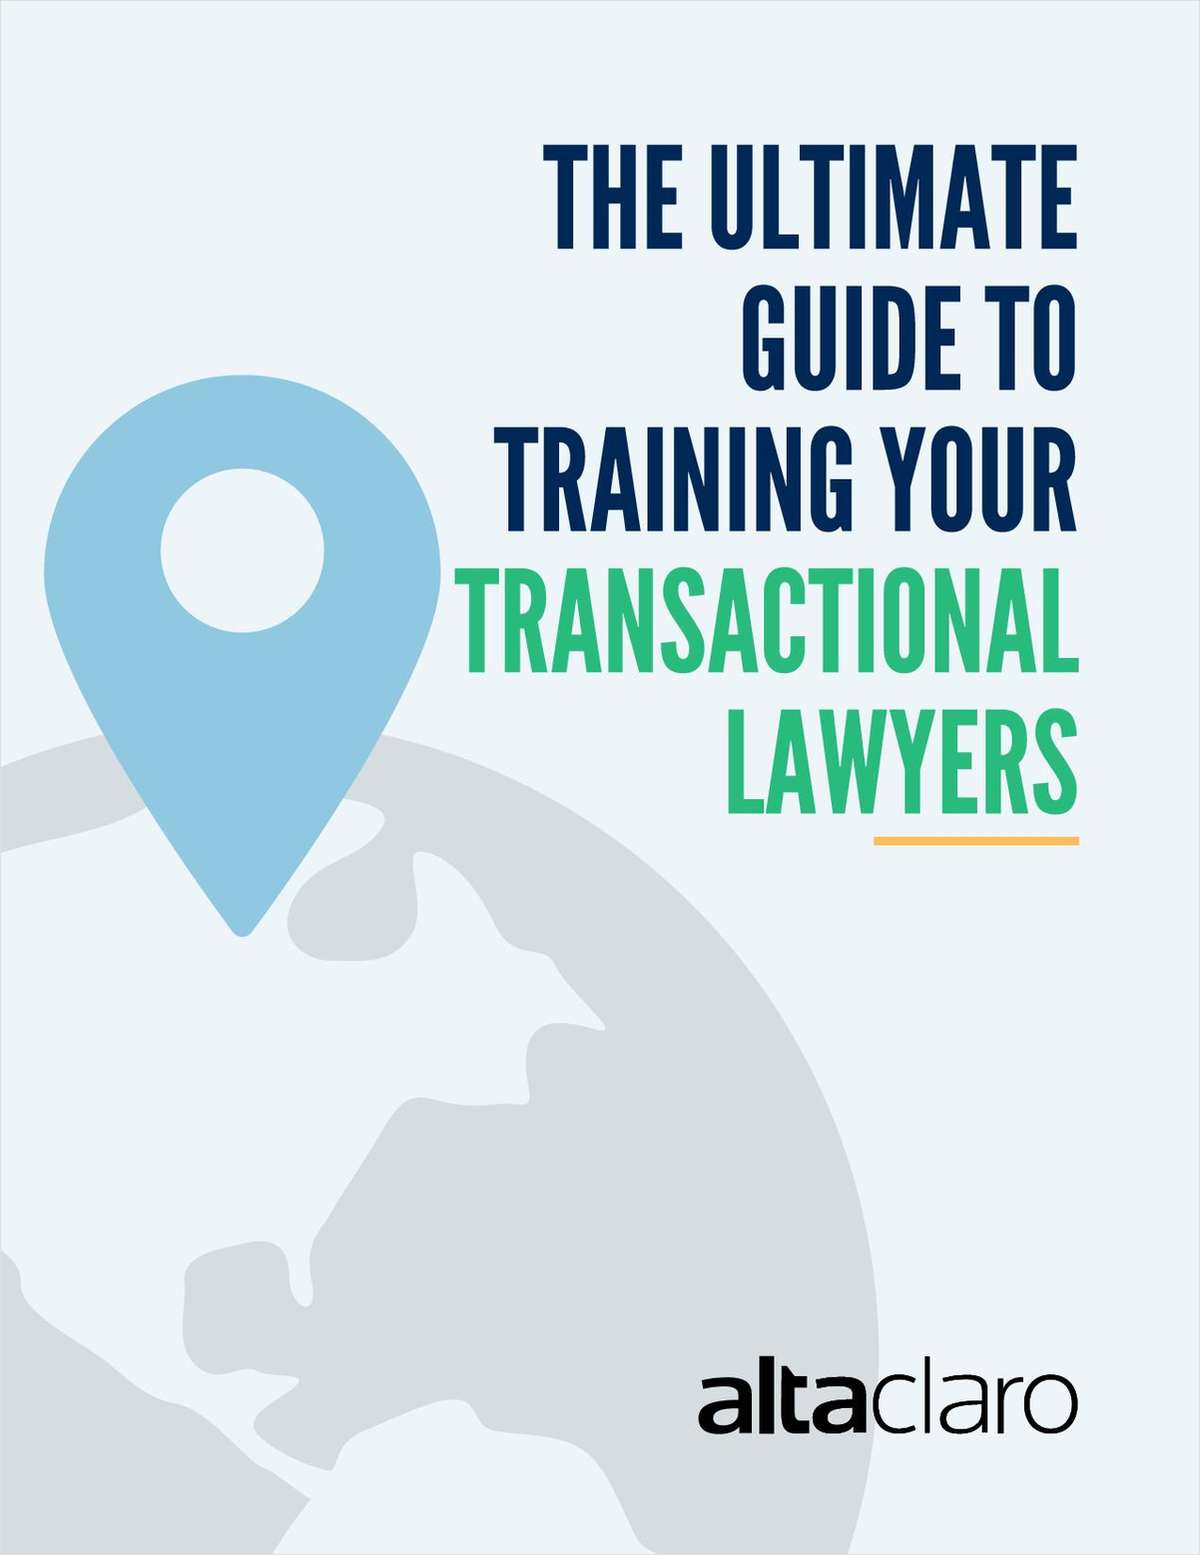 There has been a lot of buzz in recent years extolling the benefits of experiential learning and training for lawyers.But what is experiential learning, and how can you take advantage of the approach to augment your firm’s associate training programs? Download this guide to find out.